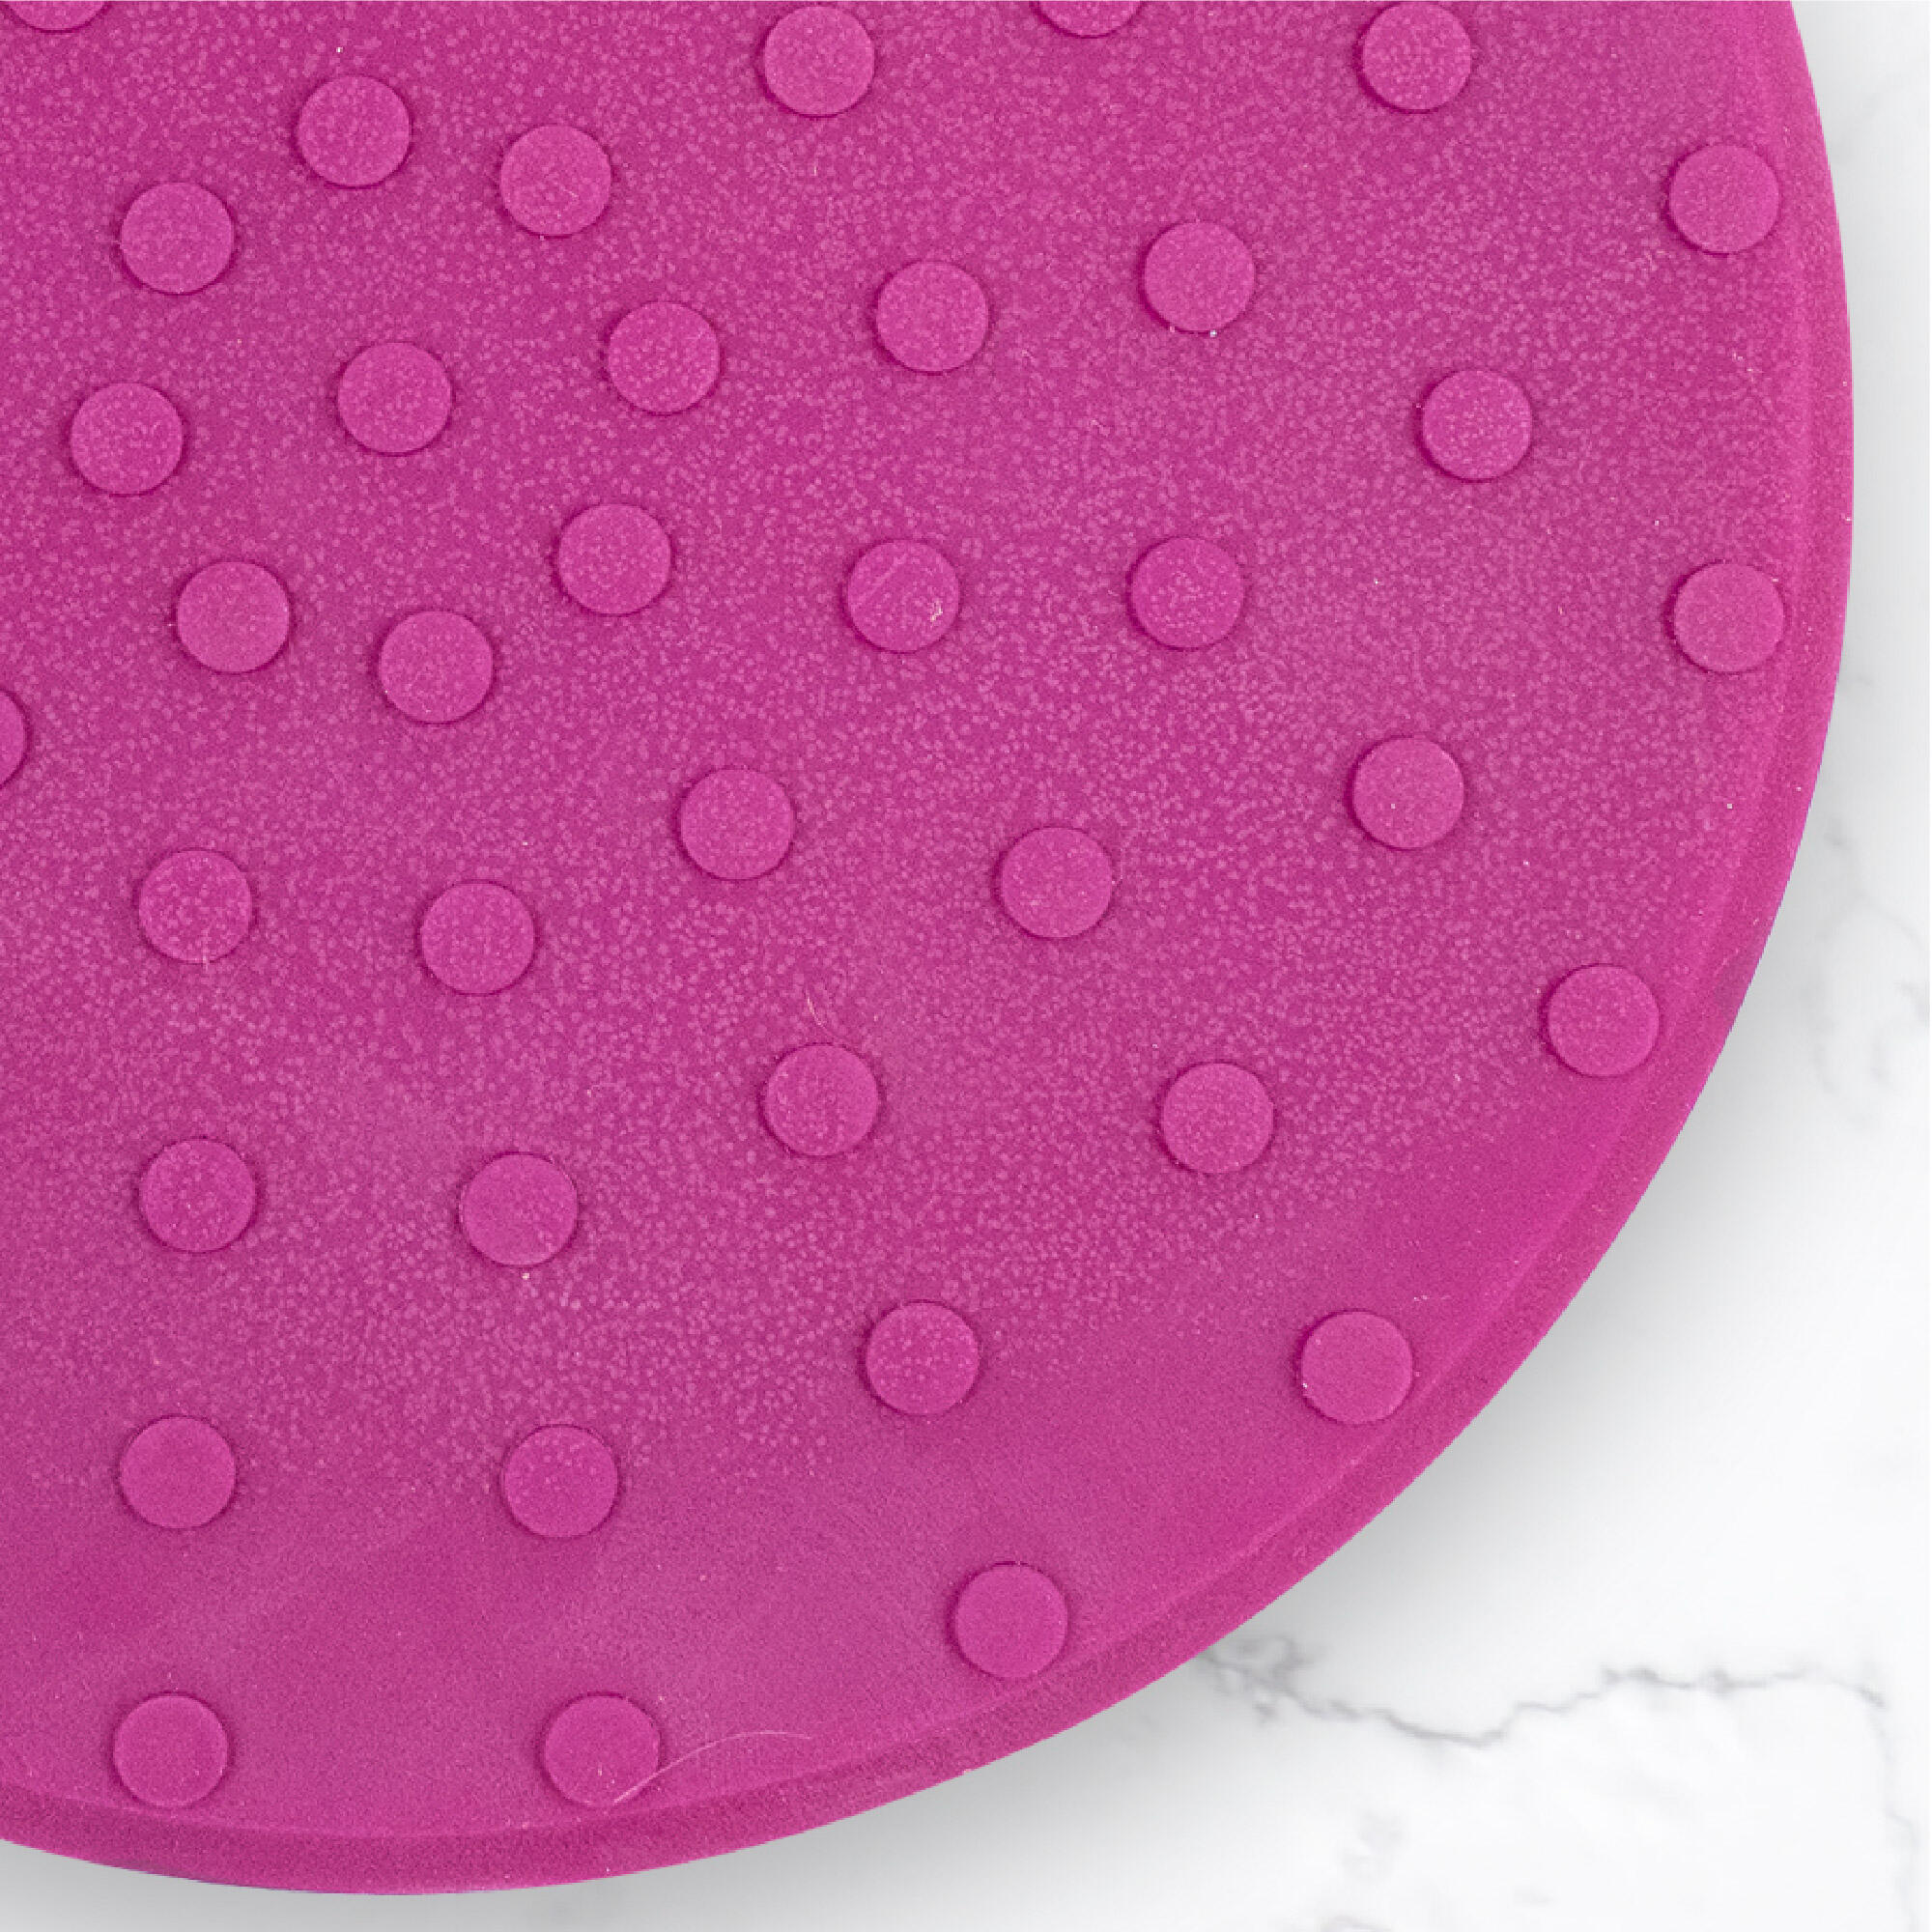 Yoga Support Jelly Pad - Plum –